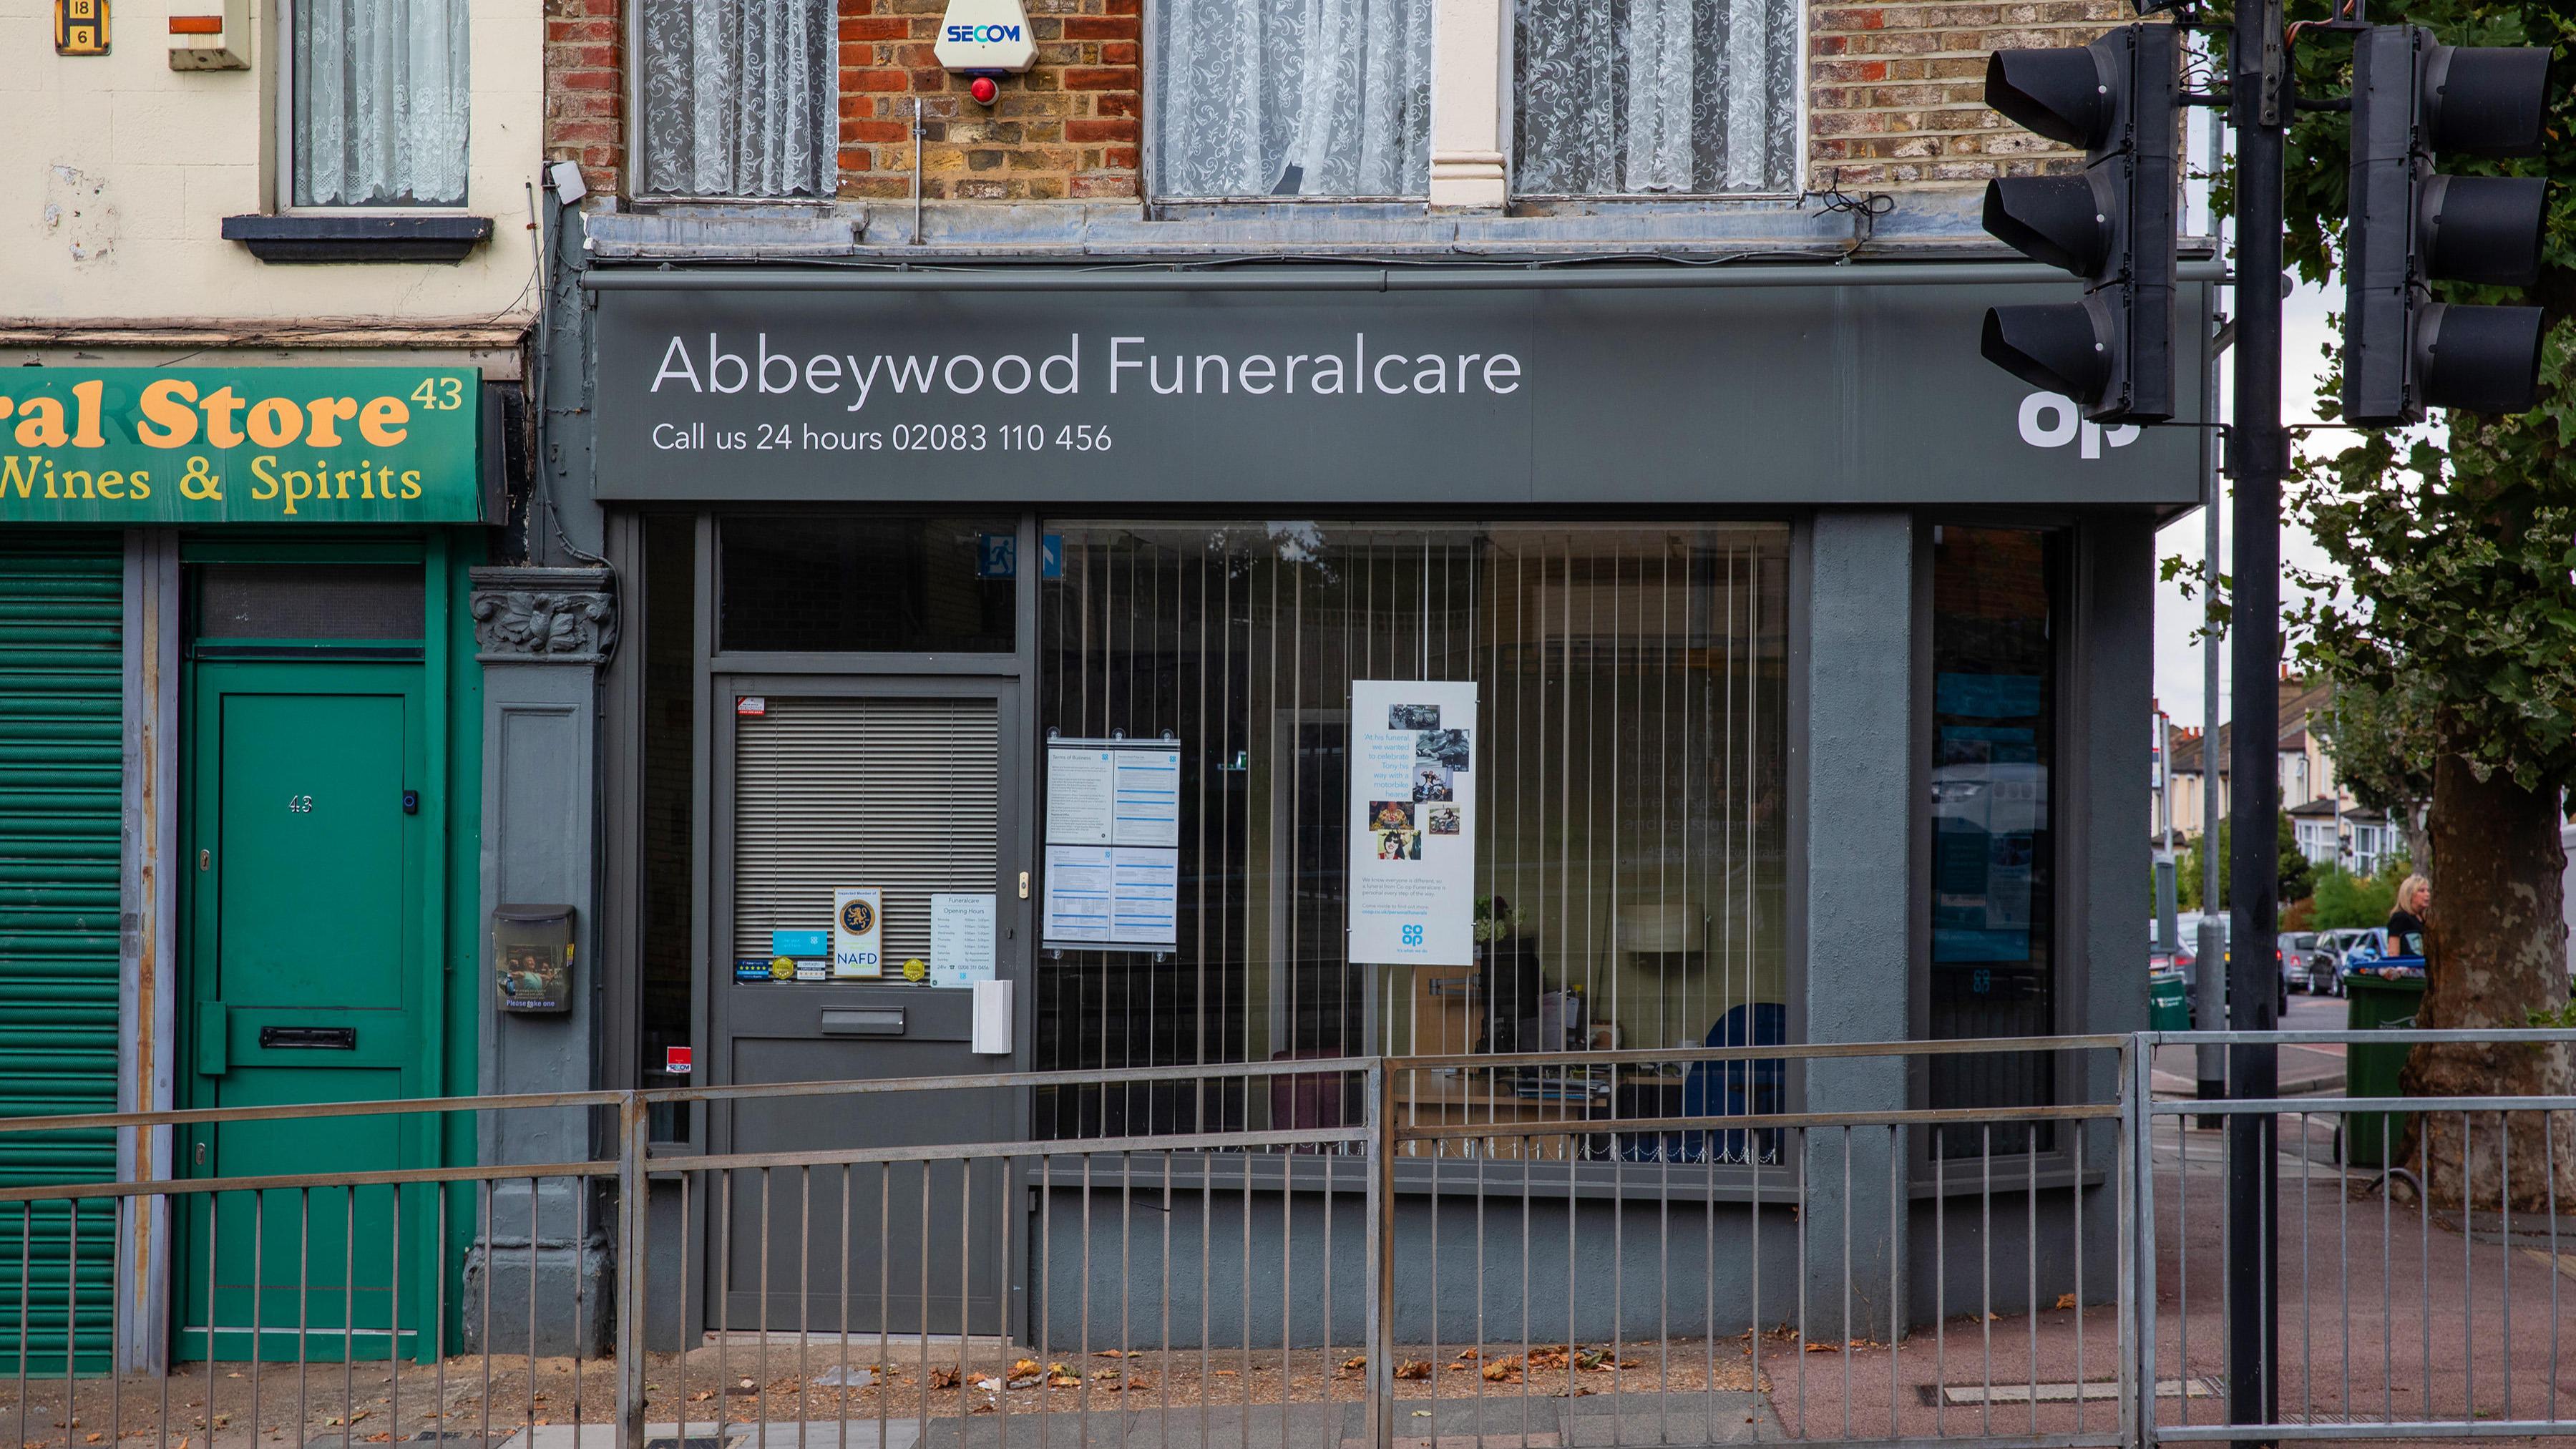 Images Abbeywood Funeralcare